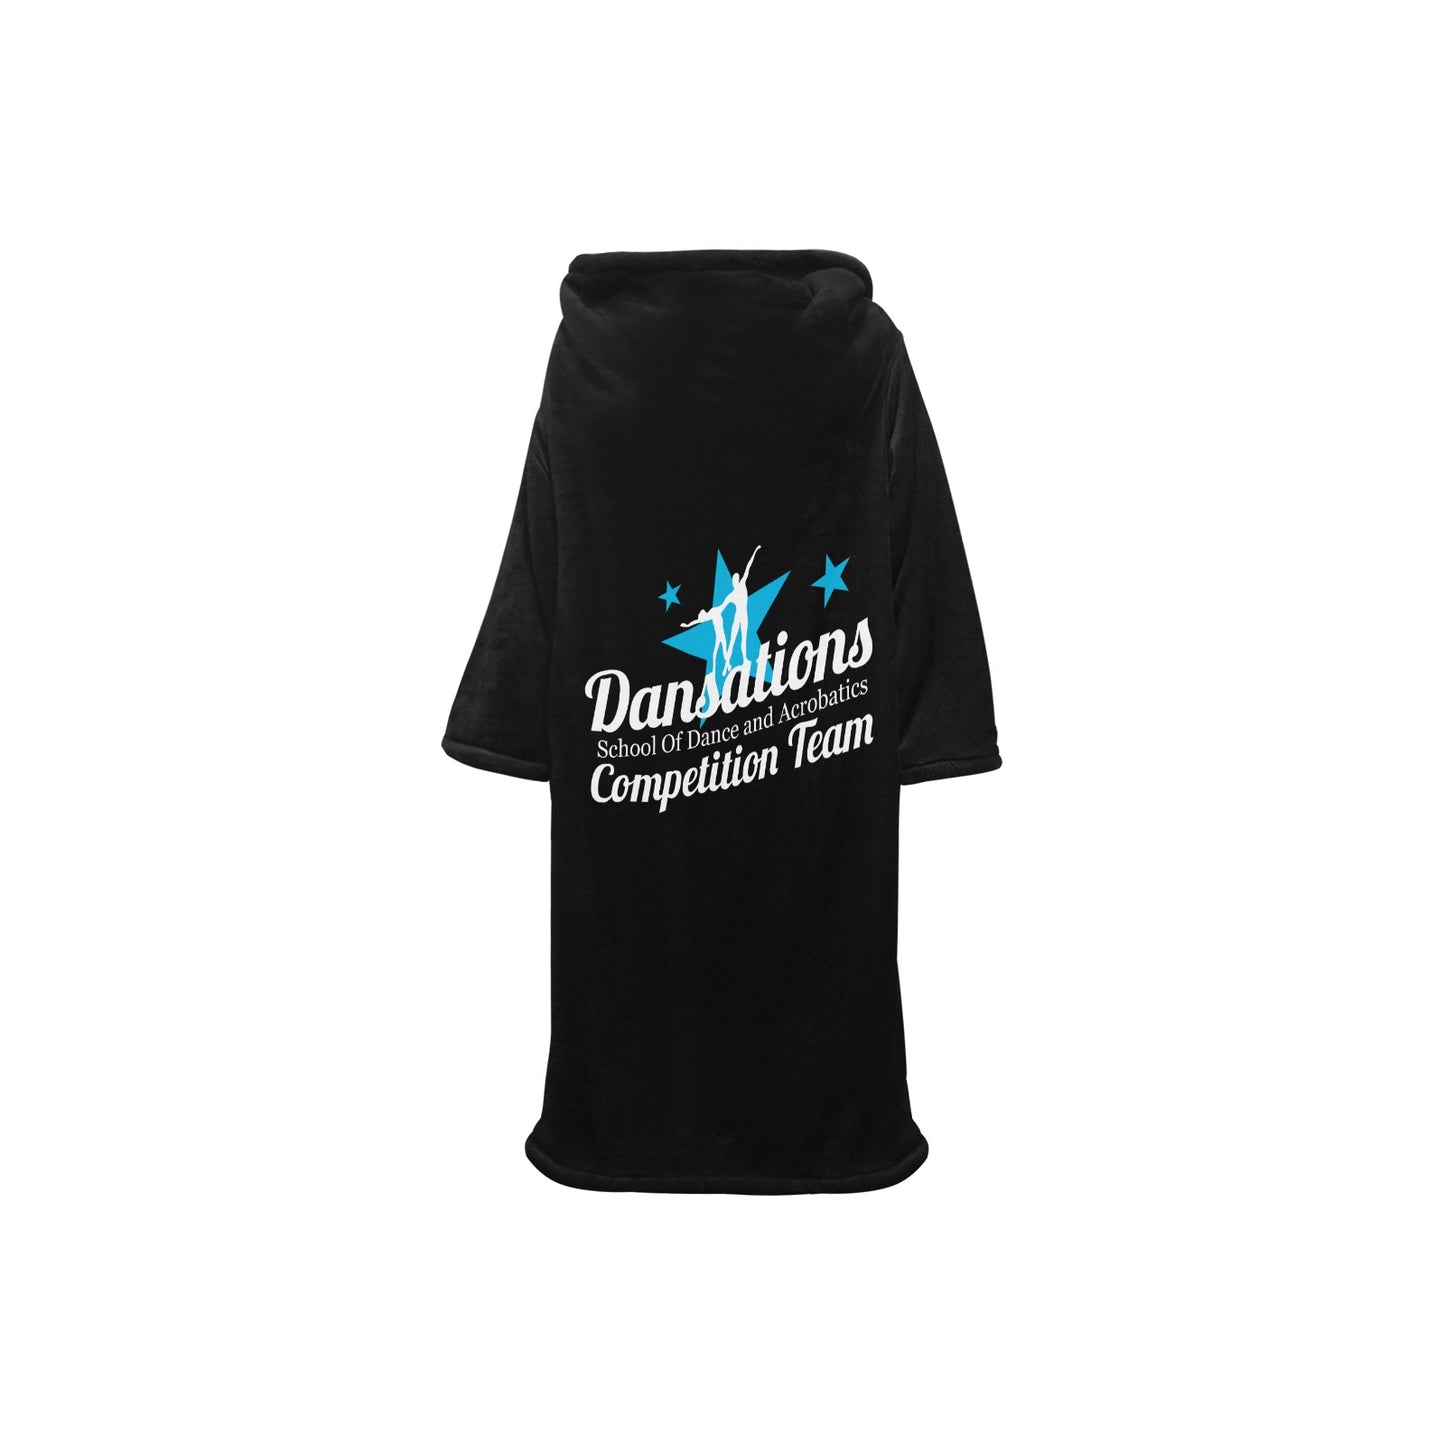 Dansations Competition Team Blanket Robe with Sleeves for Kids